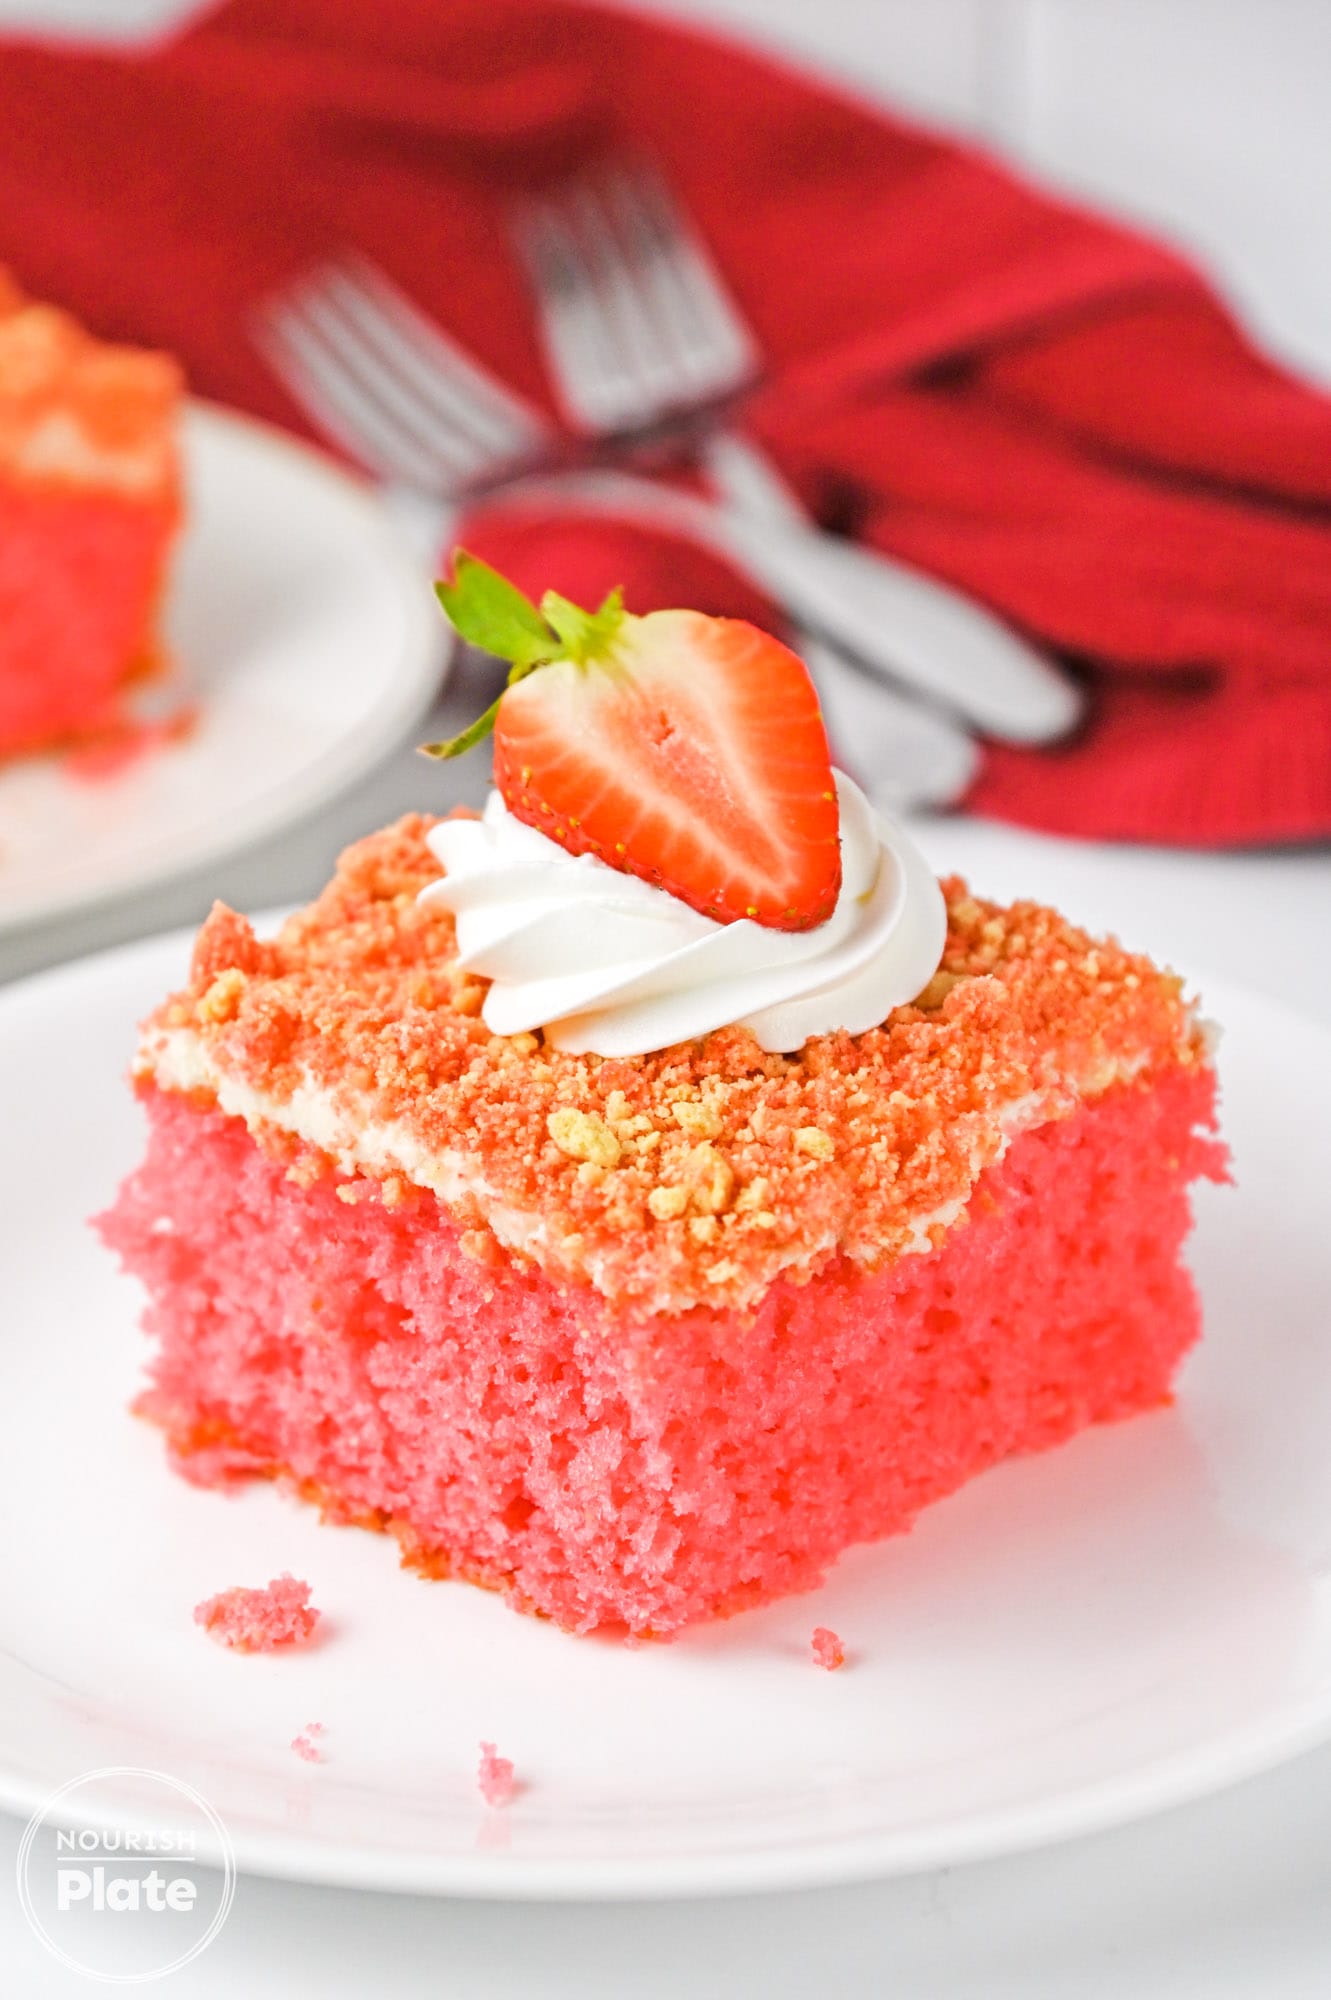 A slice of strawberry crunch cake with whipped cream on top and half a strawberry, plated on a white plate and 2 forks in the background with a red tea towel.